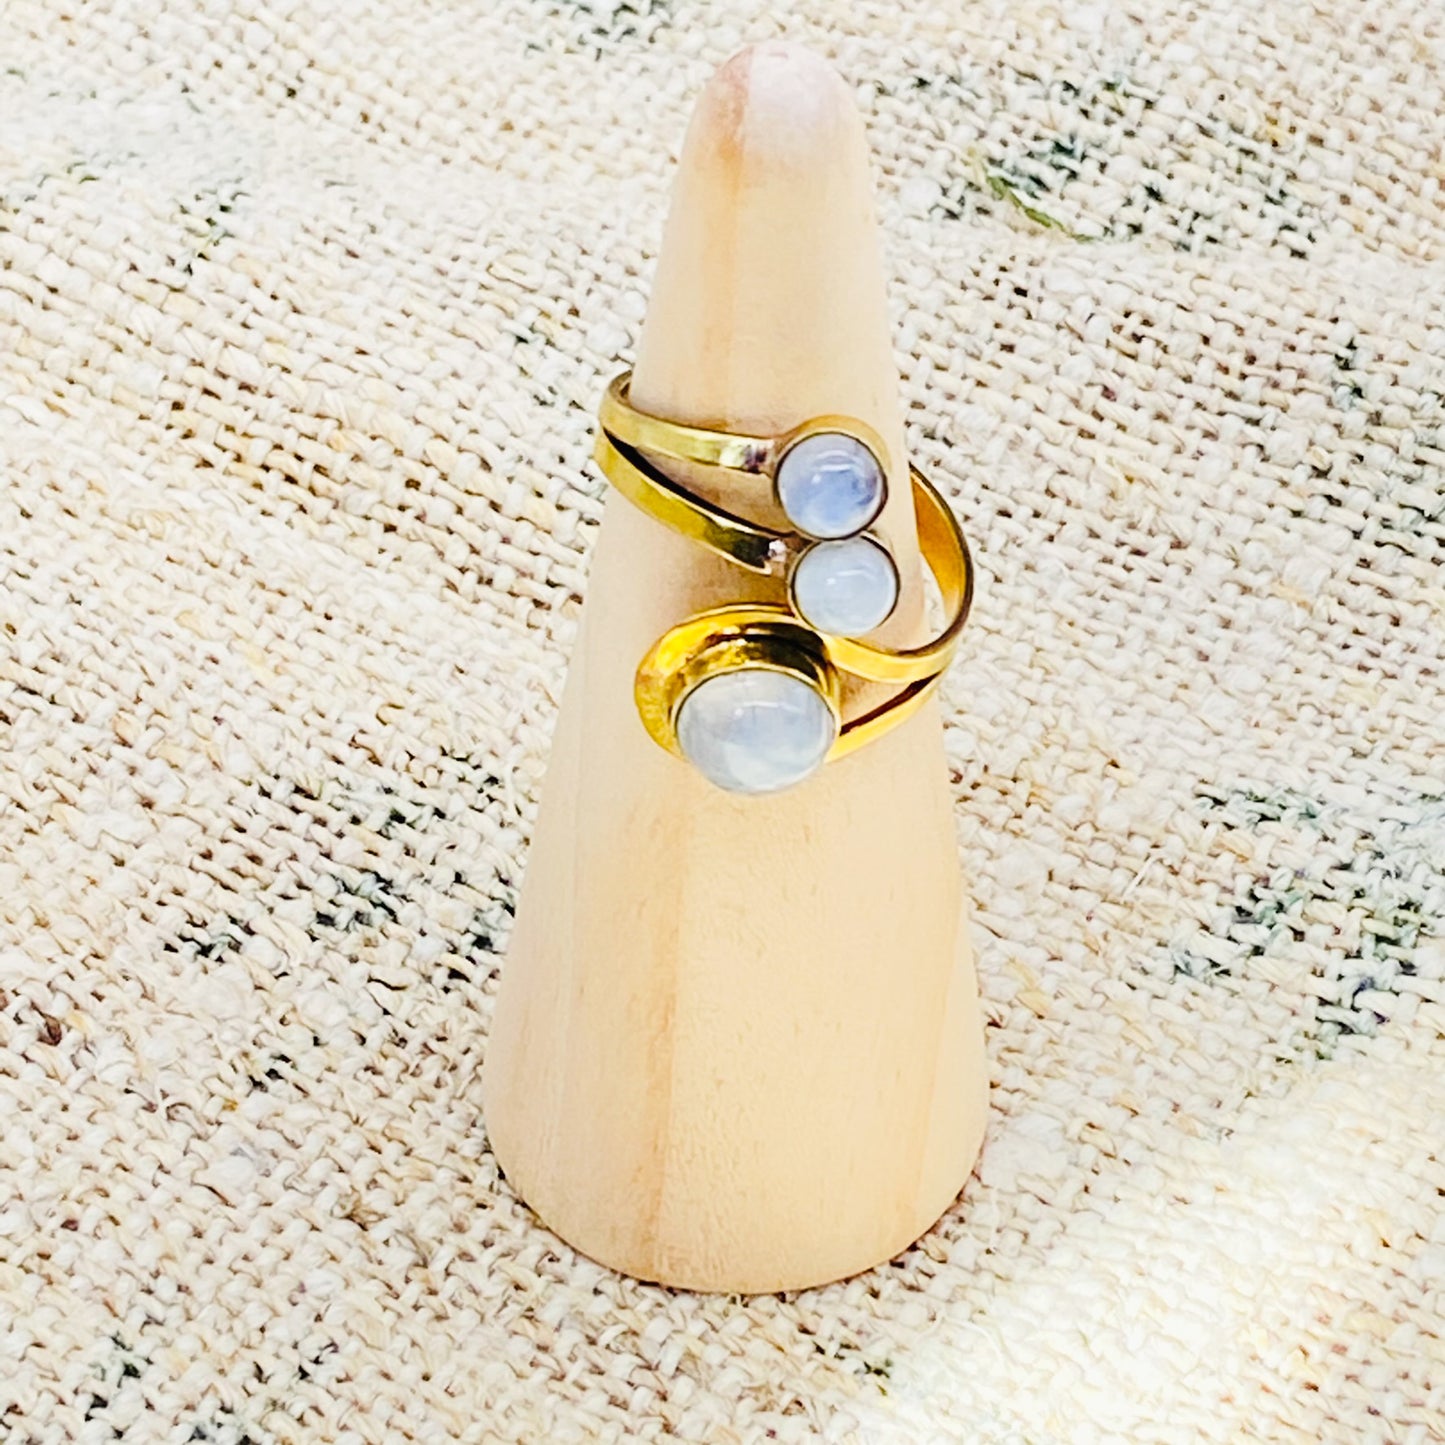 Adjustable Chunky Rings, Bohemian Rings, Gold Filled Handmade Multistone Rings, Gift For Her, Non Tarnish Rings, Gypsy Style, Crystal Rings